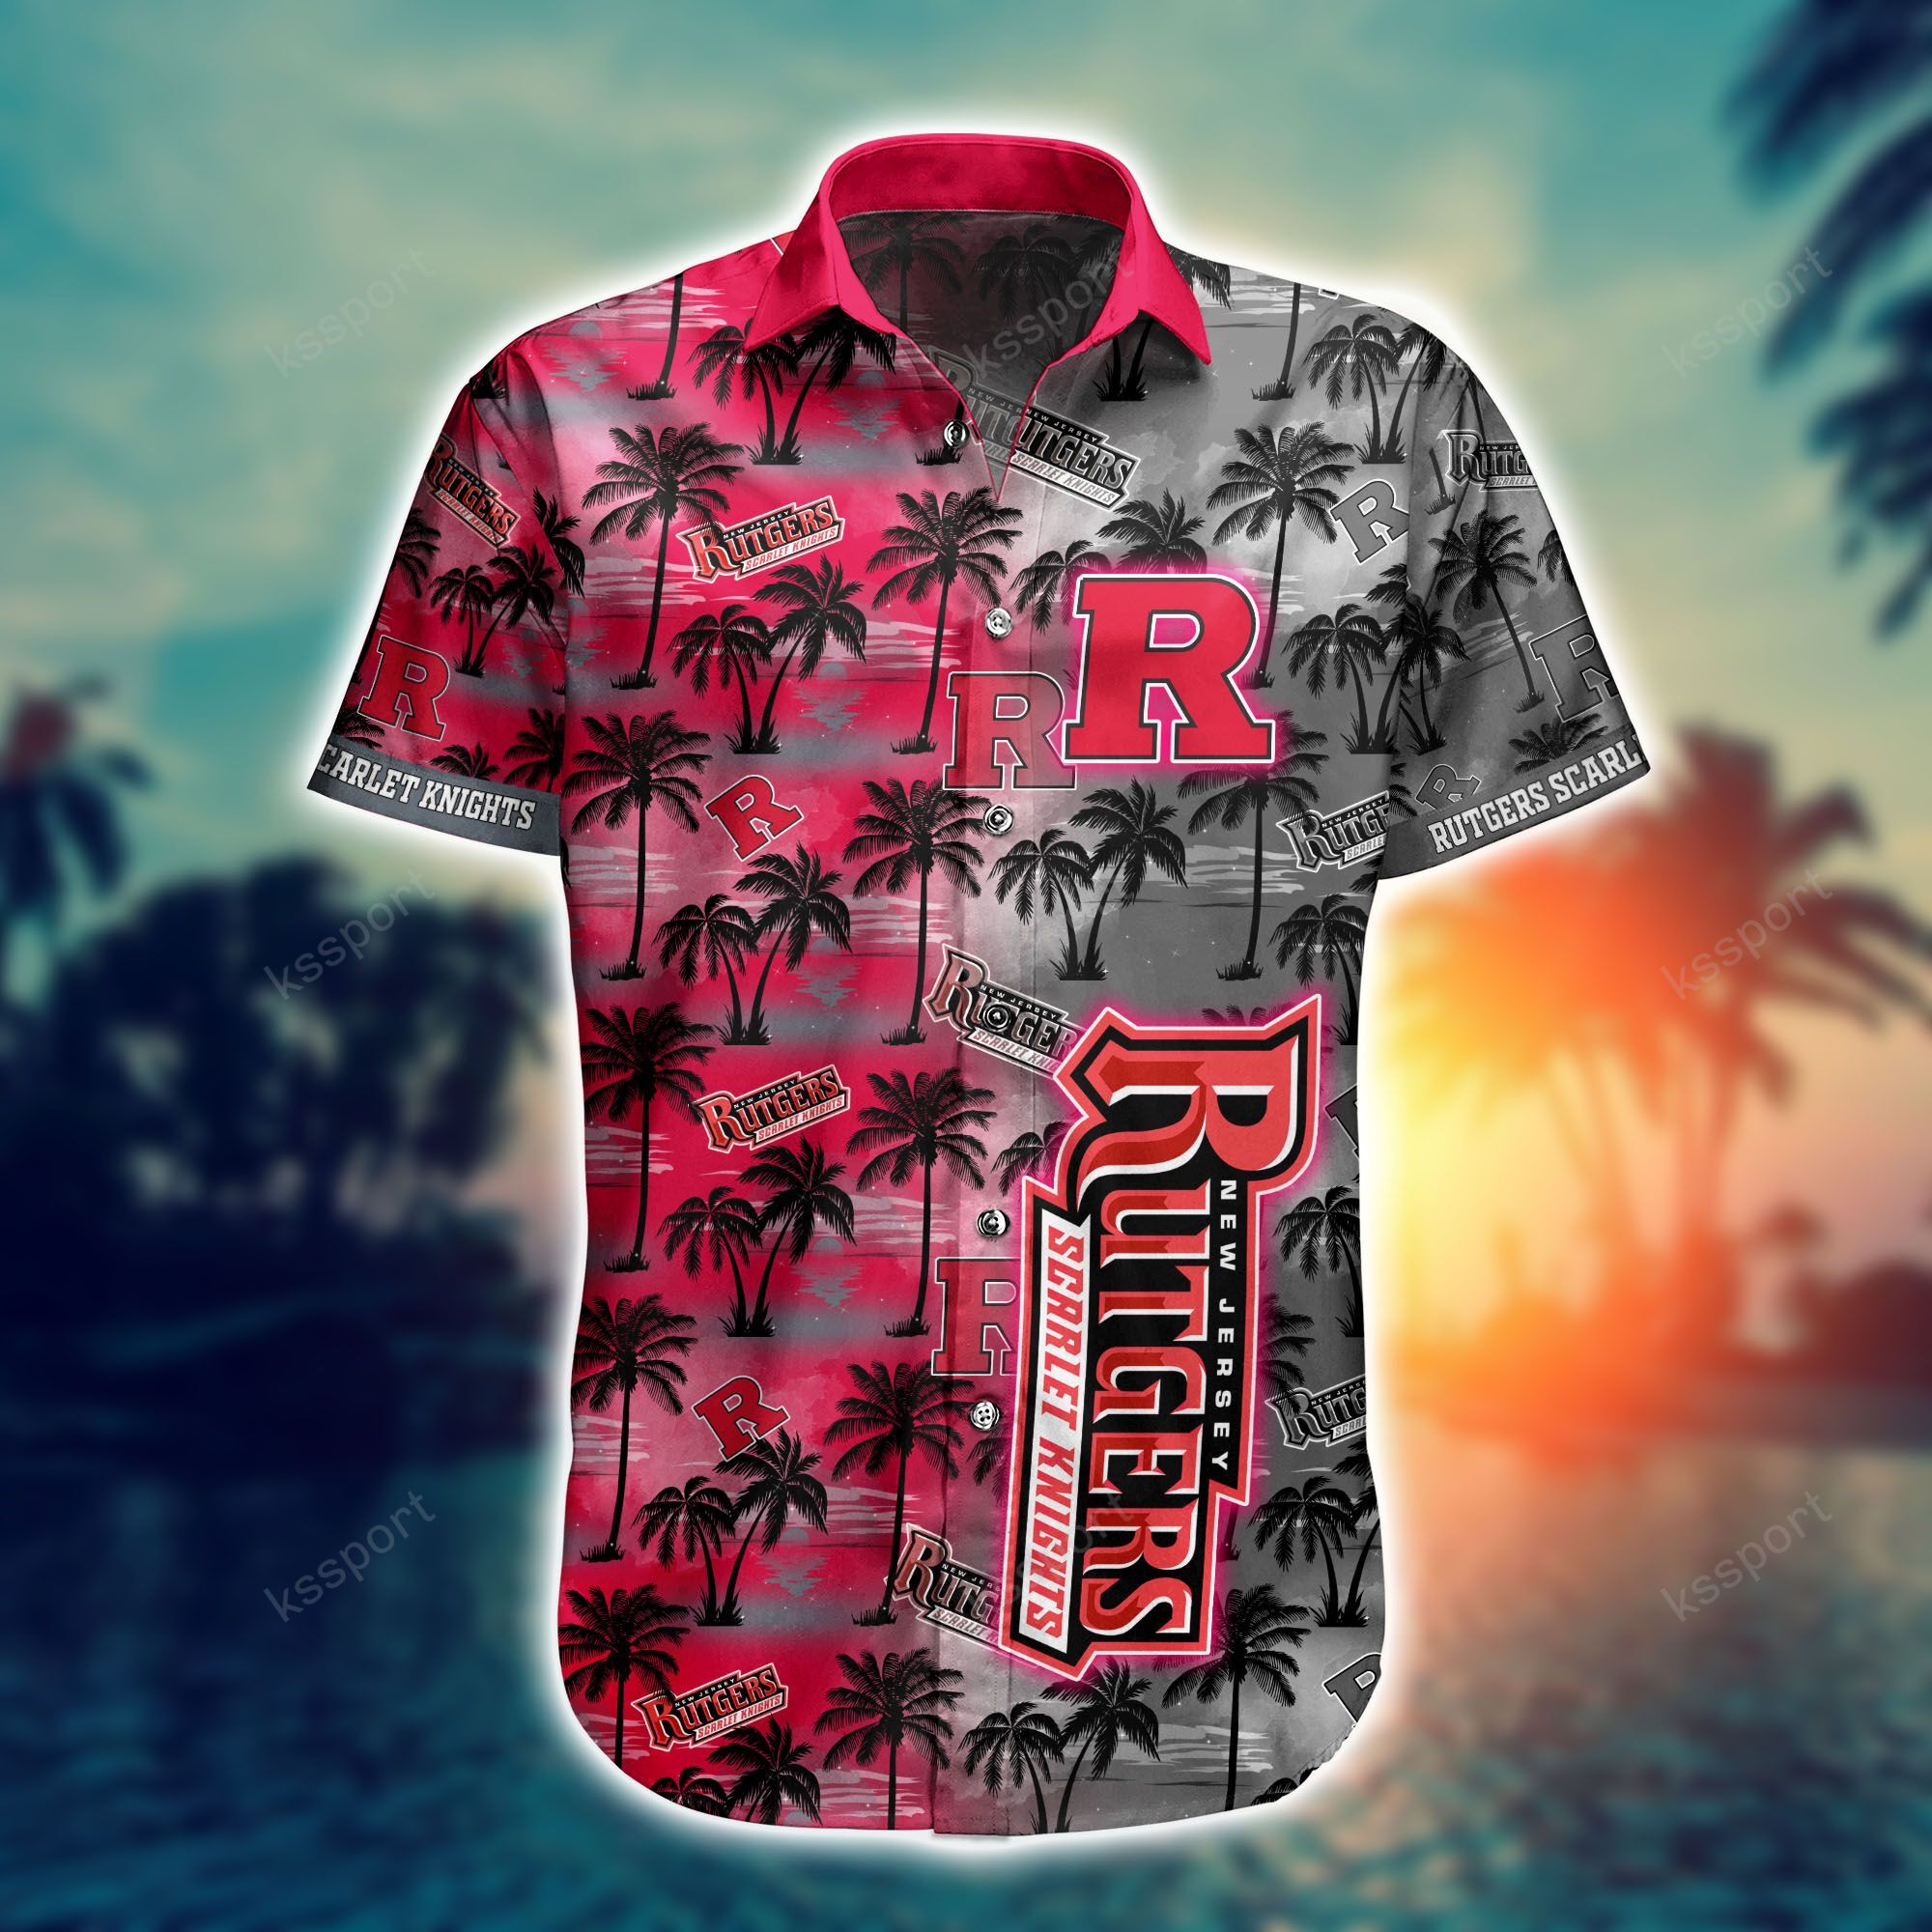 Top cool Hawaiian shirt 2022 - Make sure you get yours today before they run out! 169